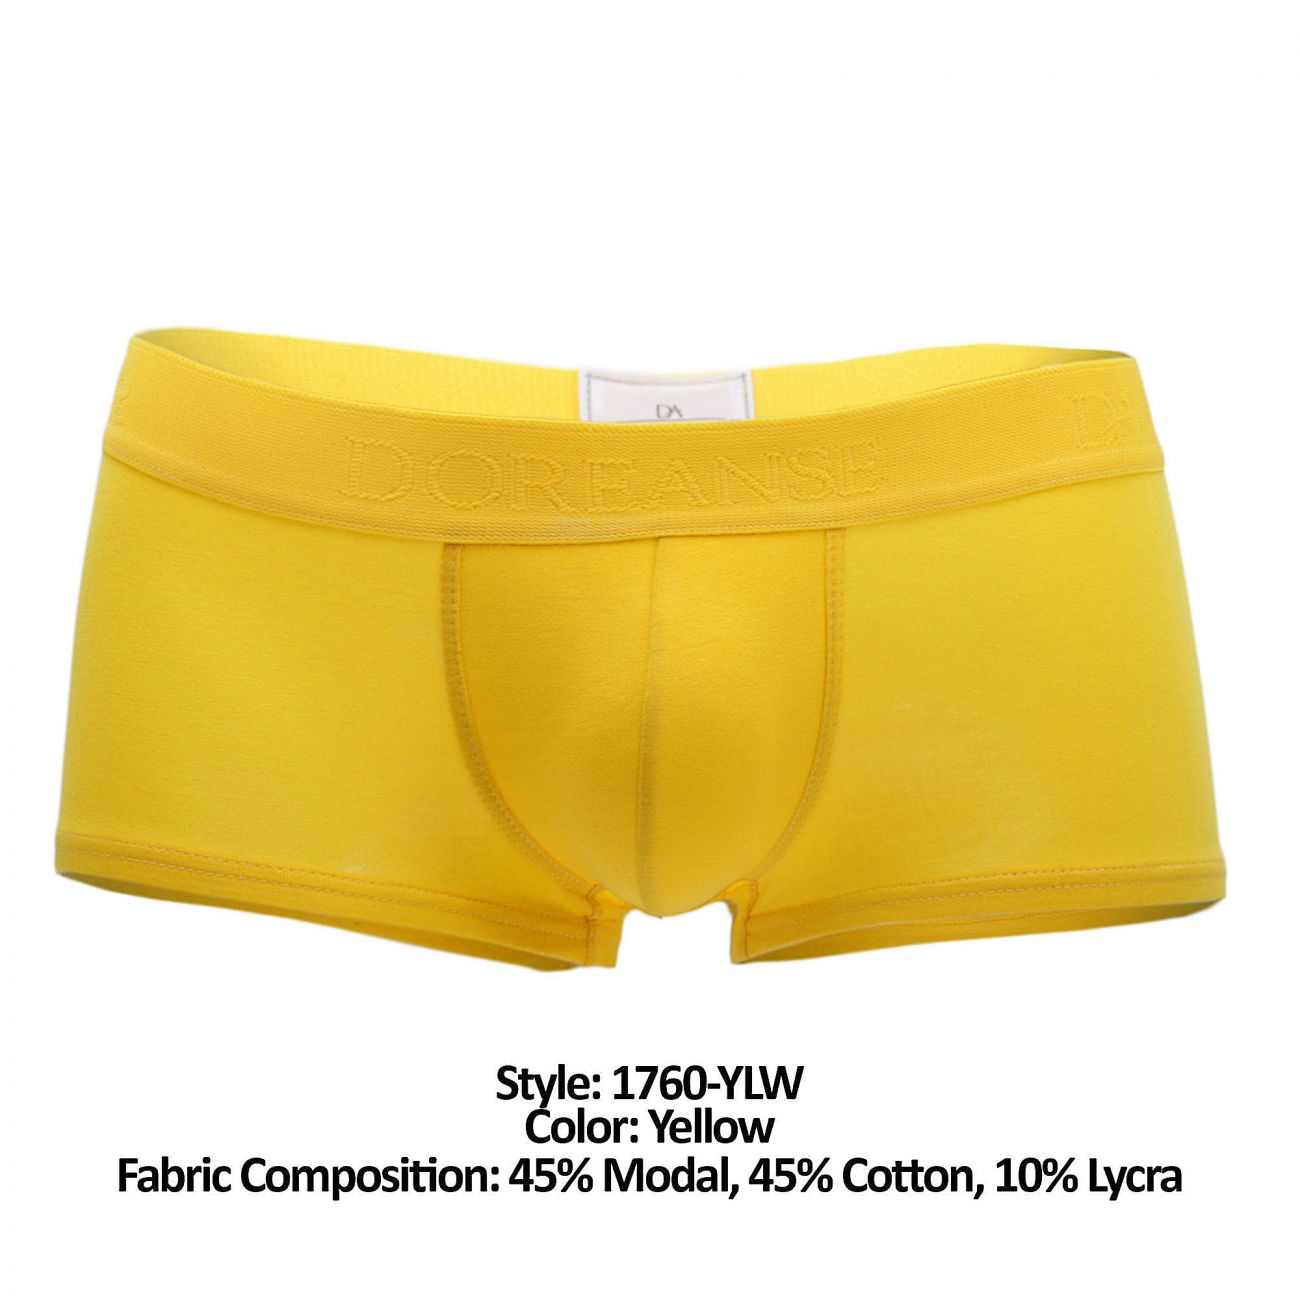 Doreanse 1760-YLW Low-rise Trunk